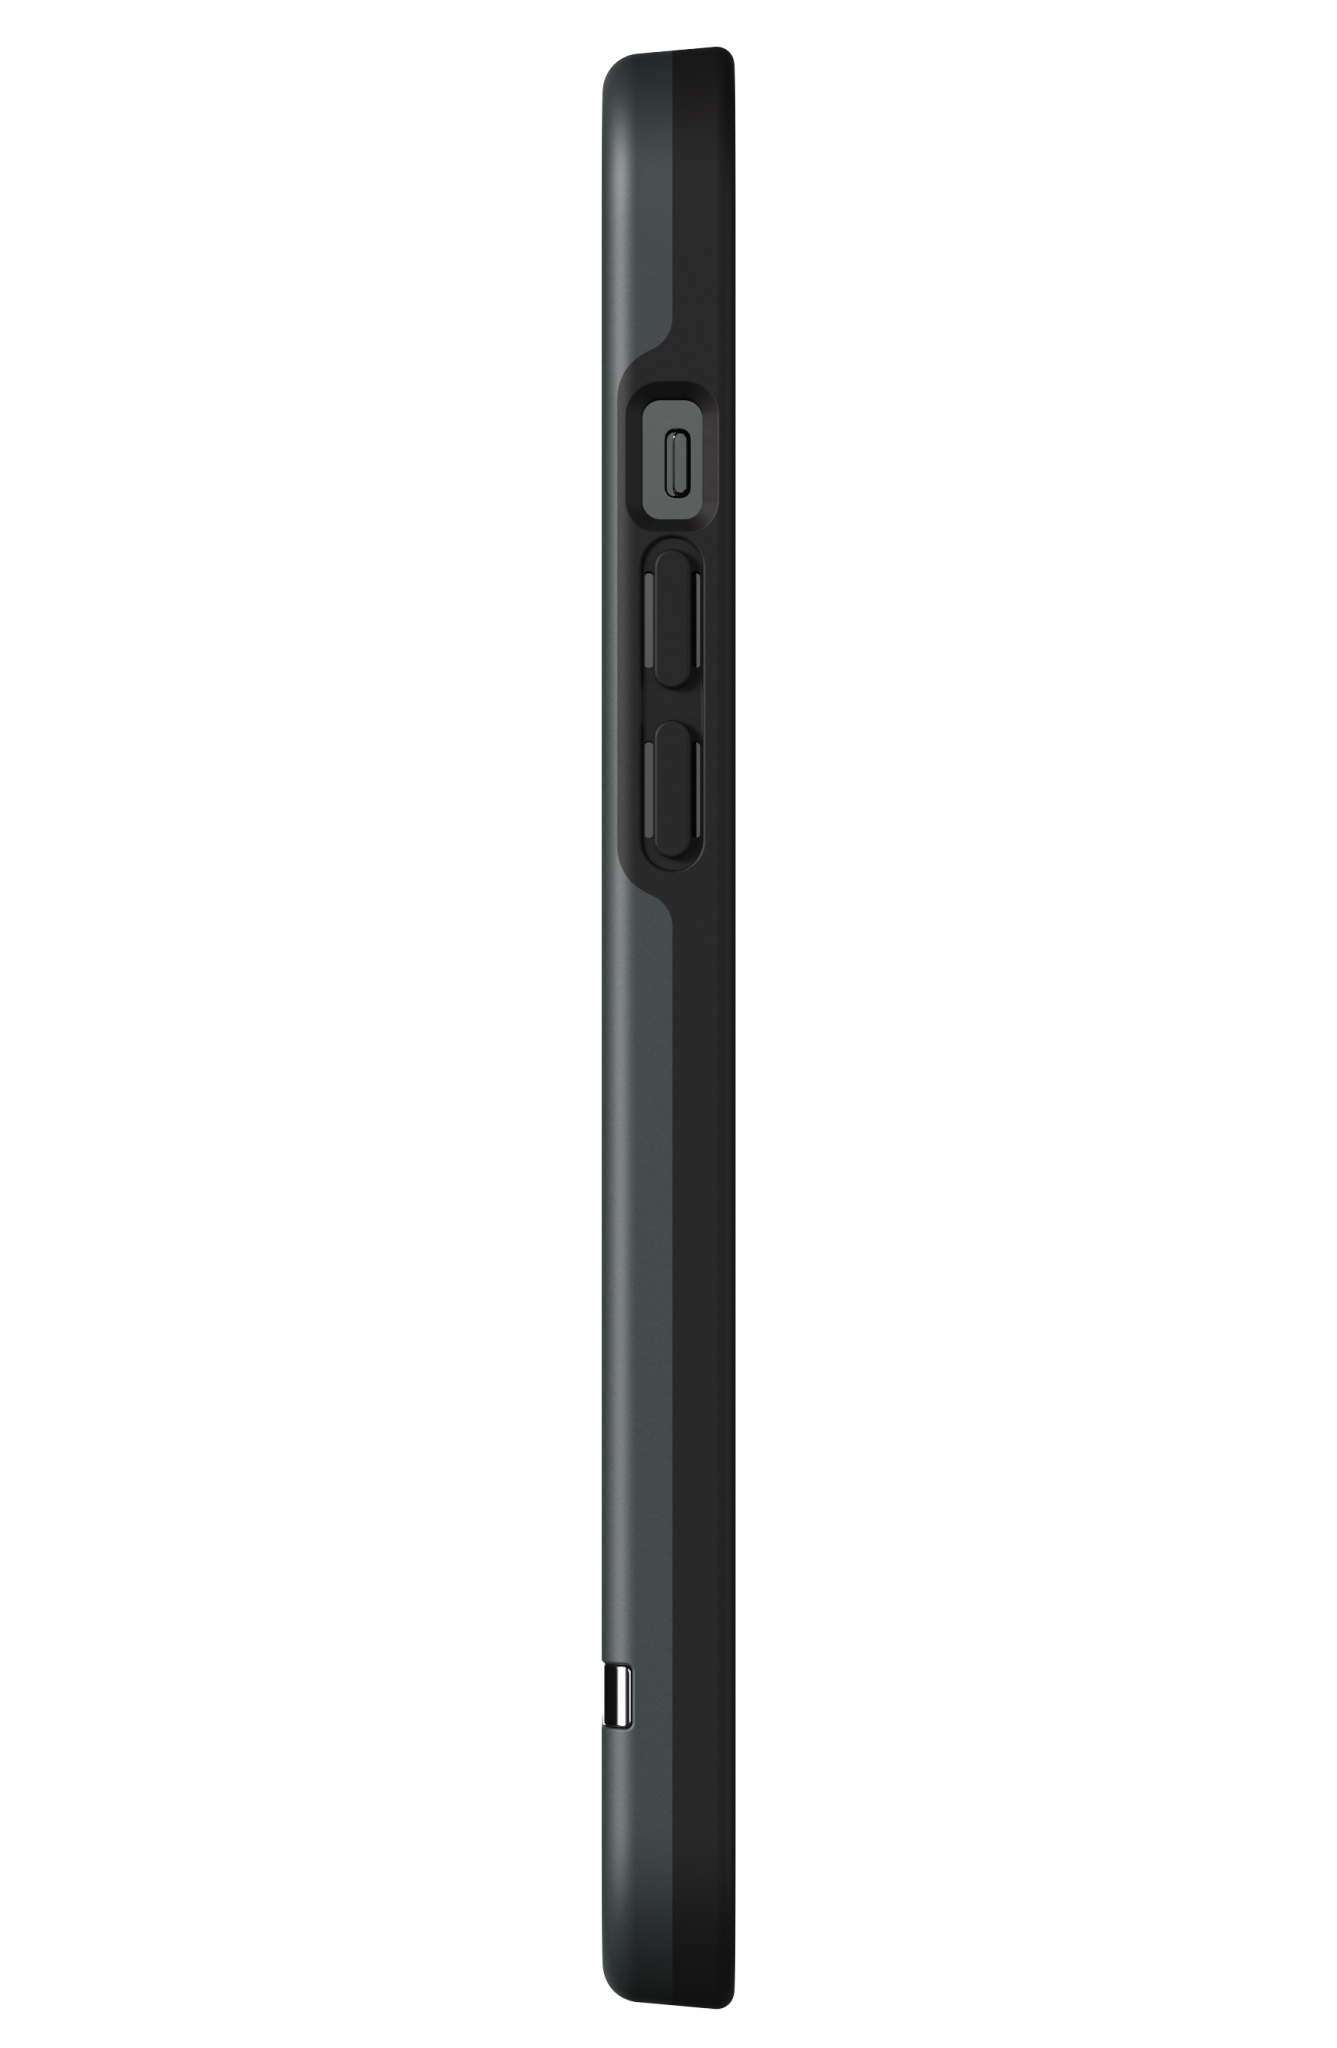 iPhone Black Out Case